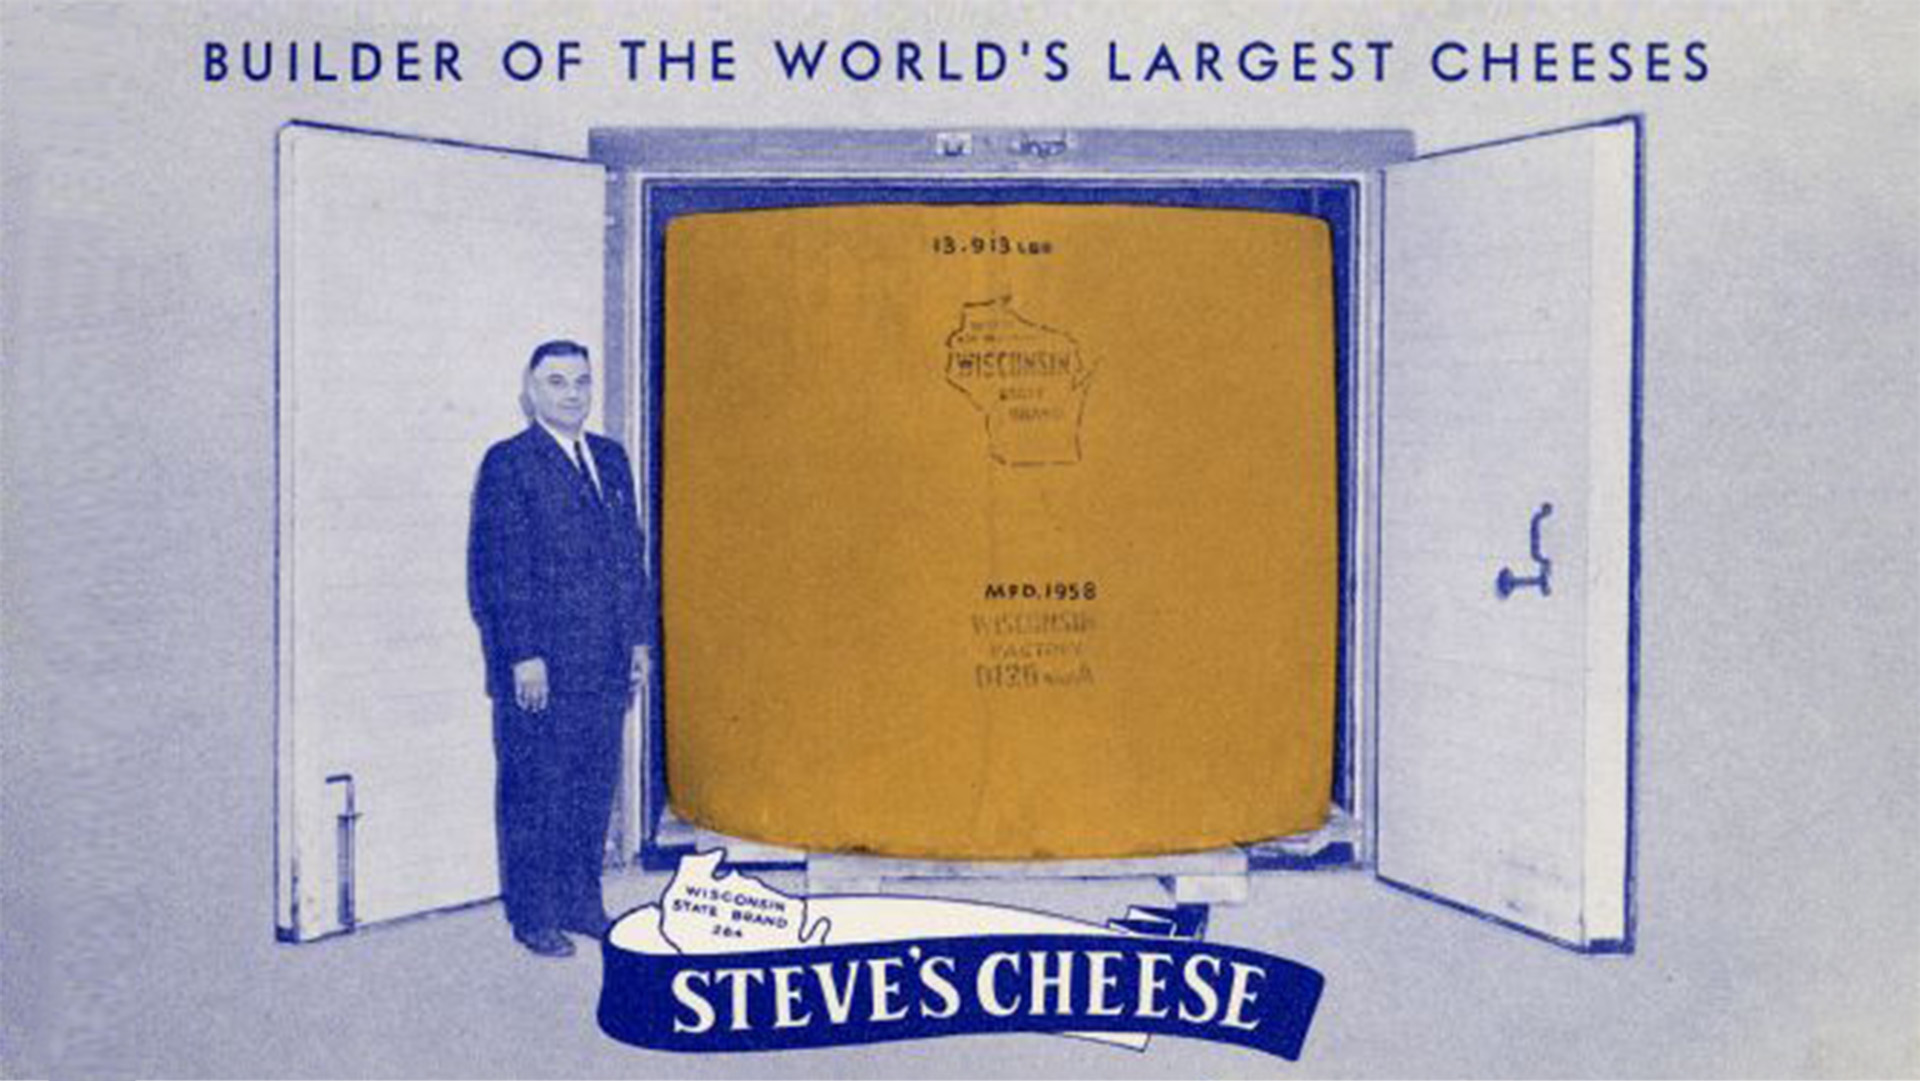 Builder of the World's Largest Cheeses